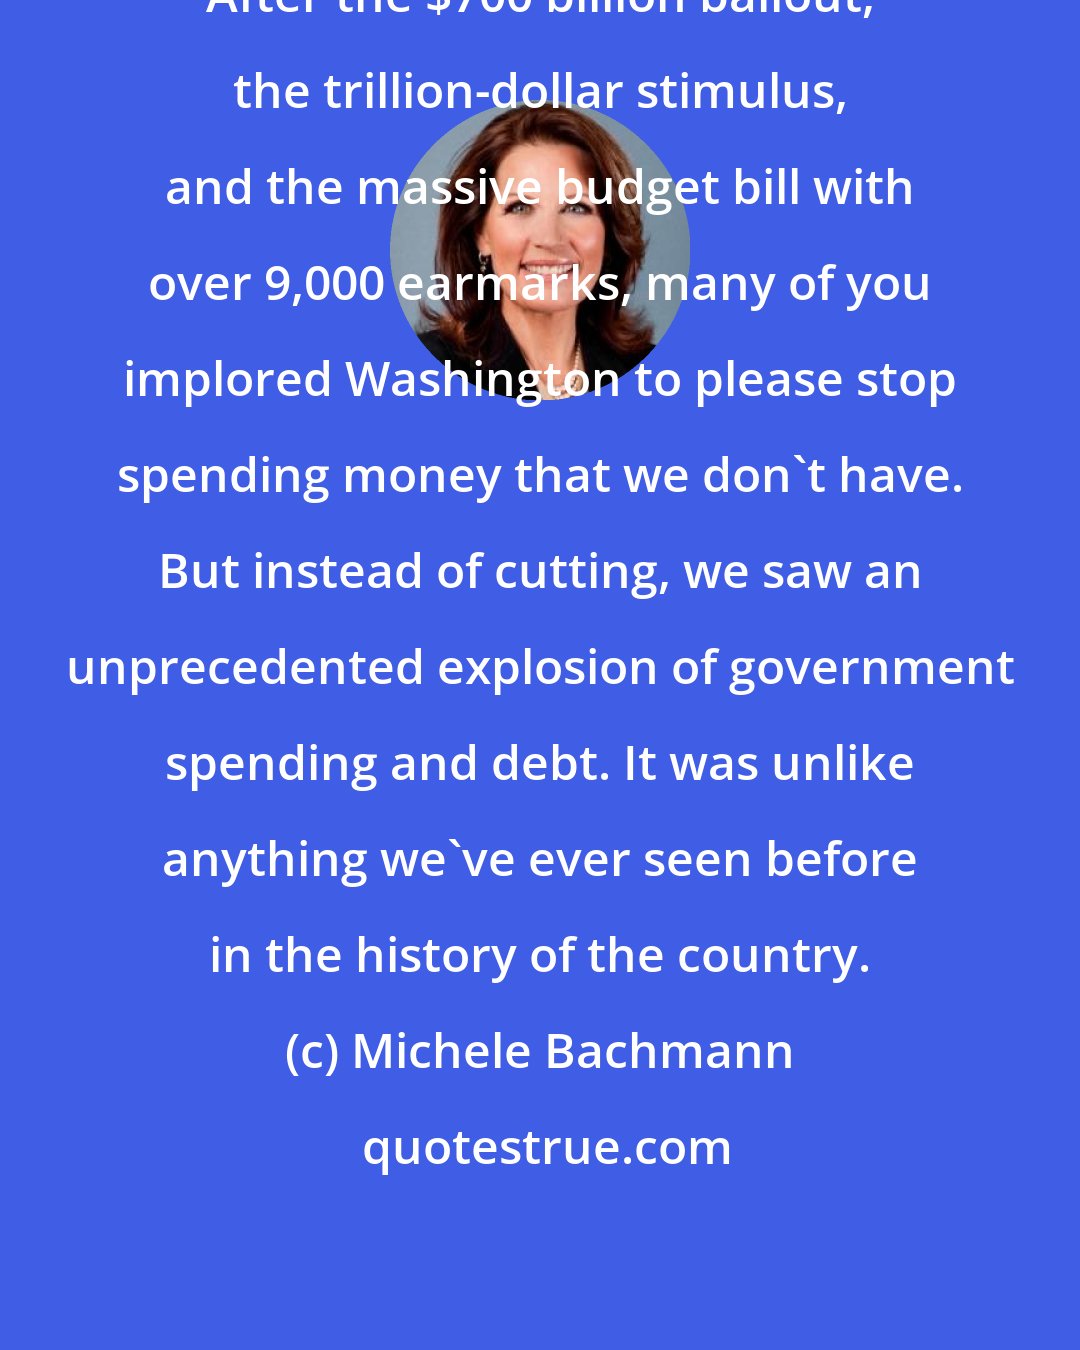 Michele Bachmann: After the $700 billion bailout, the trillion-dollar stimulus, and the massive budget bill with over 9,000 earmarks, many of you implored Washington to please stop spending money that we don't have. But instead of cutting, we saw an unprecedented explosion of government spending and debt. It was unlike anything we've ever seen before in the history of the country.